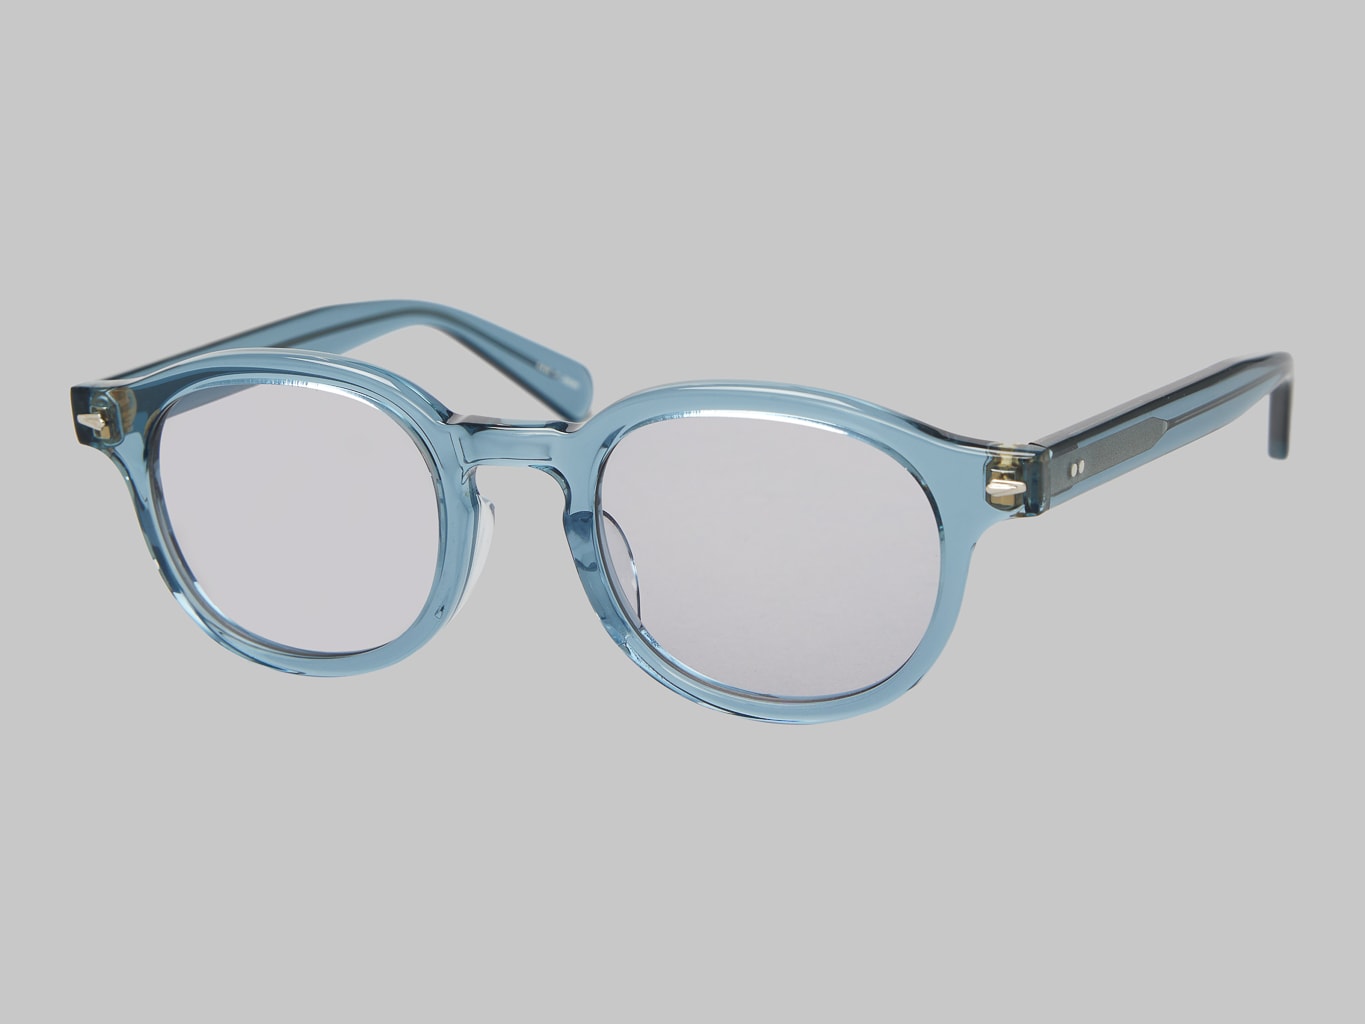 Calee Type Glasses Blue Grey made in japan